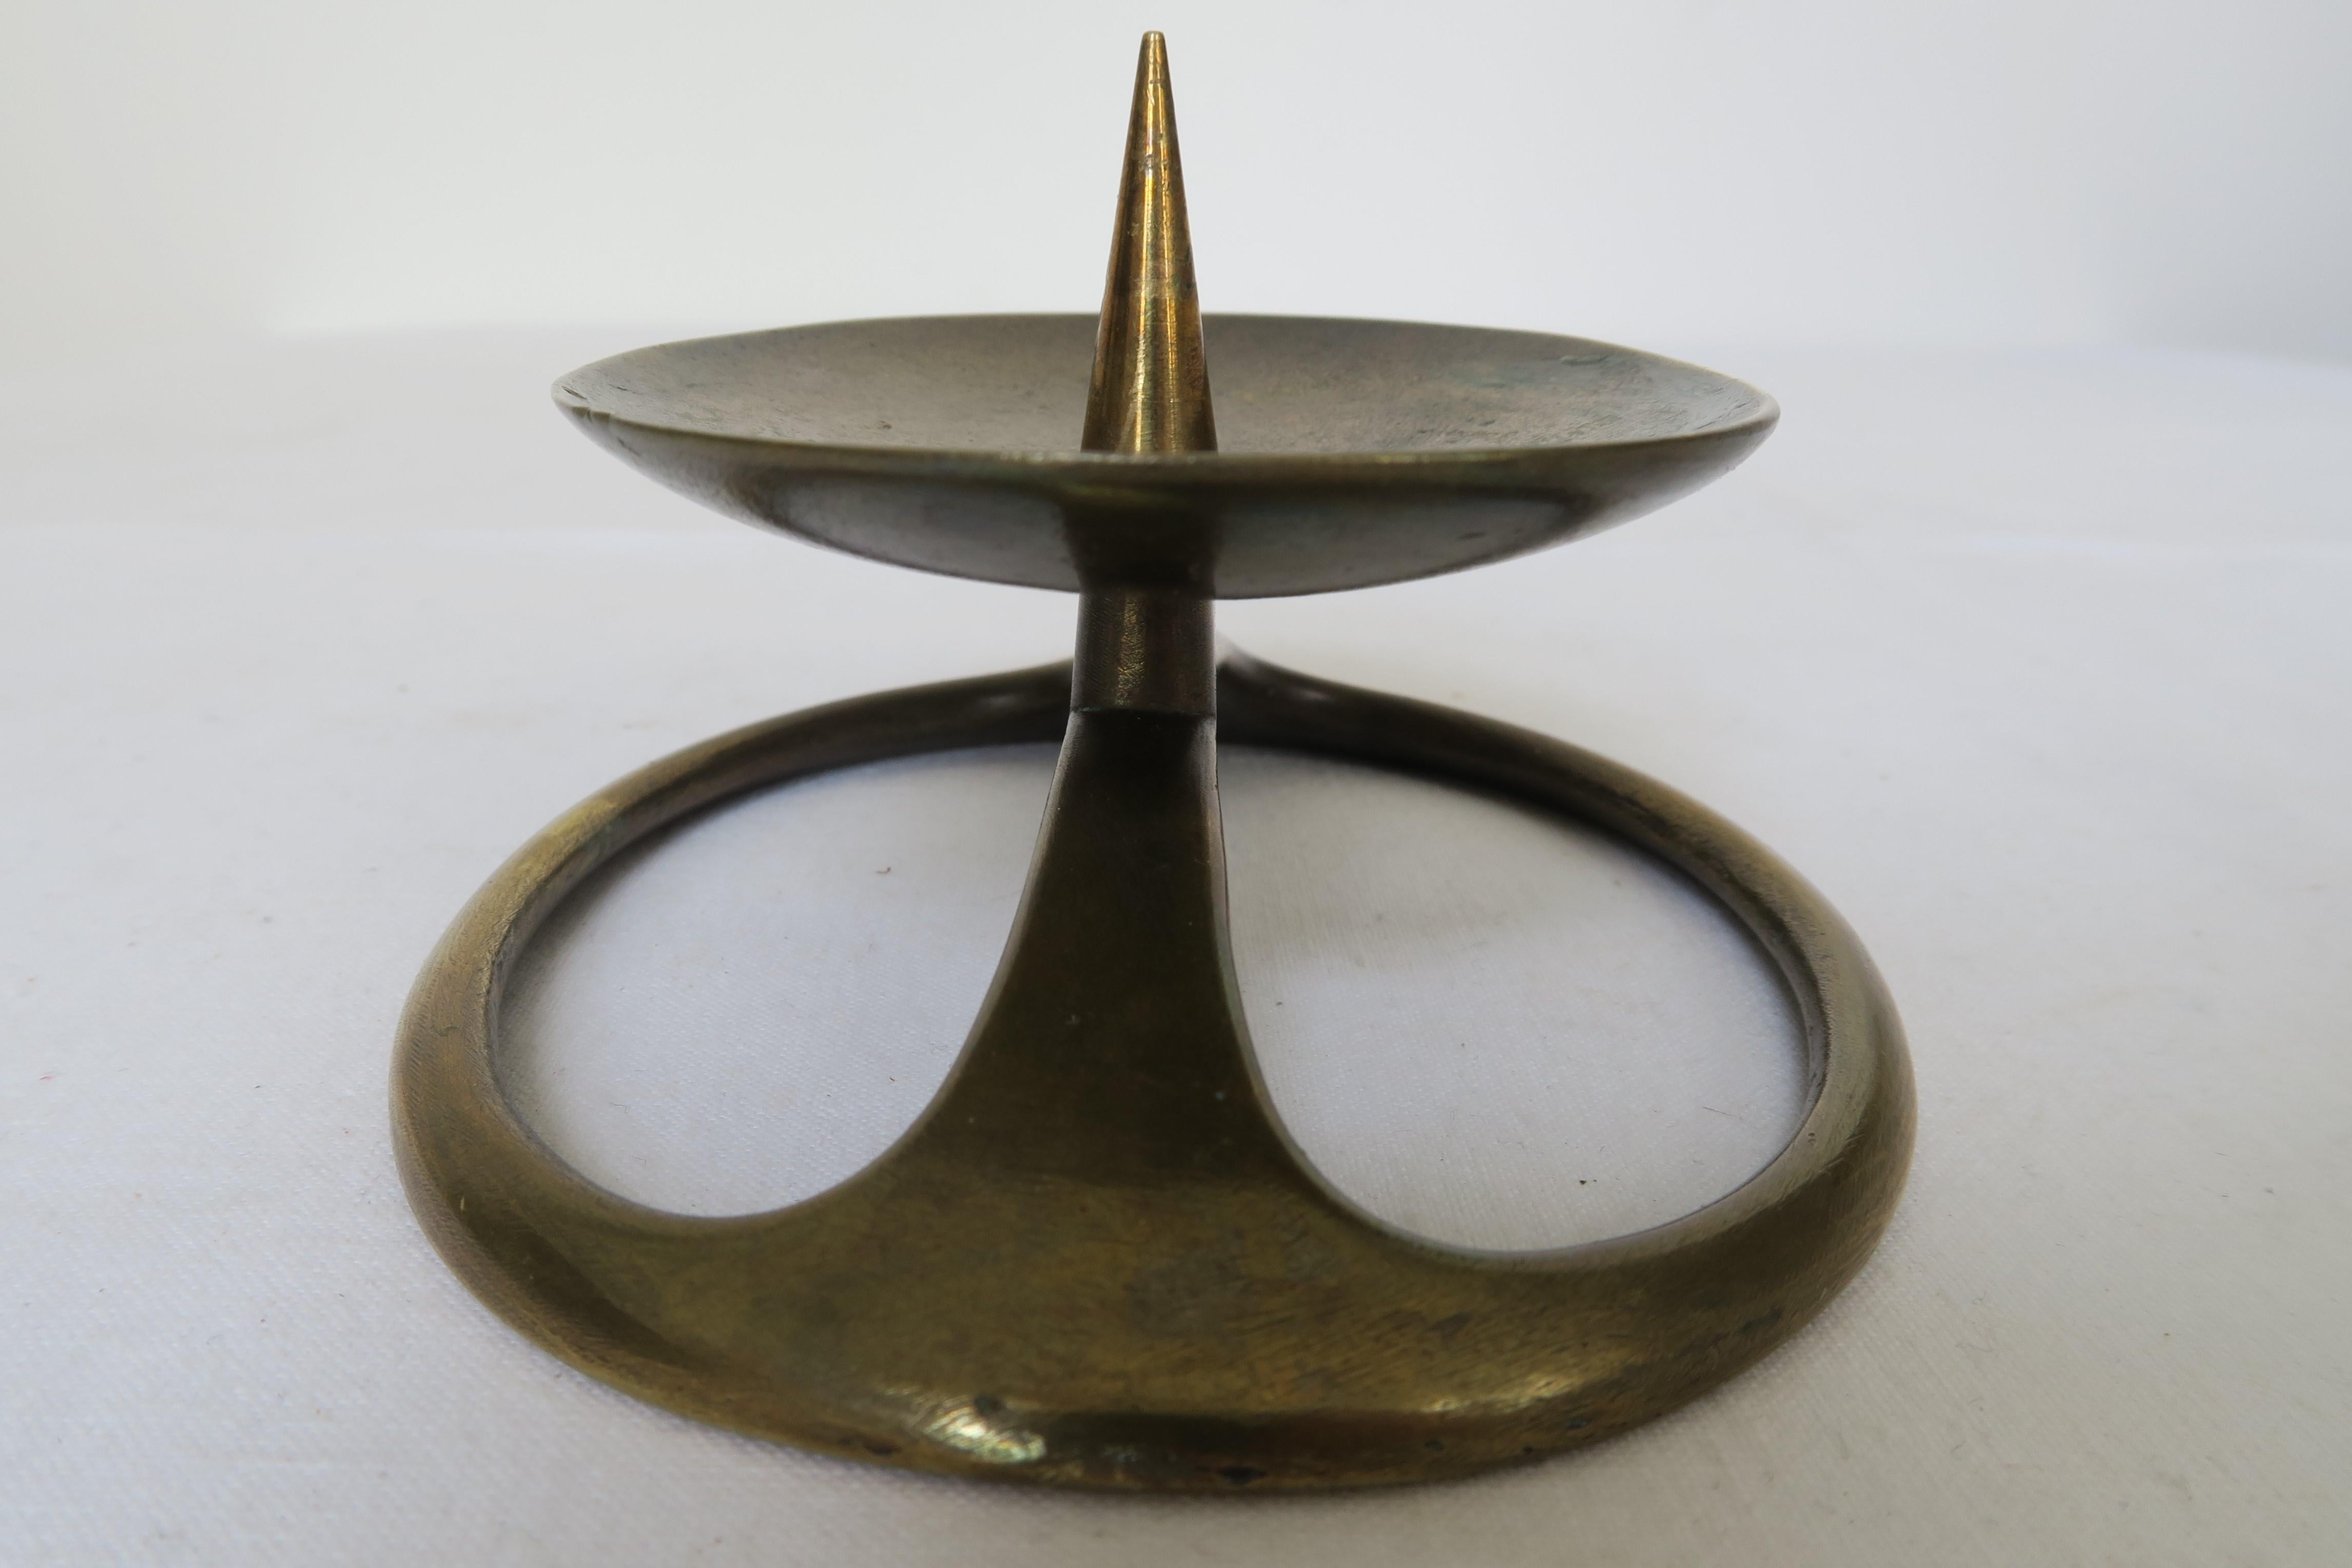 The item for sale is a unique piece of Mid-Century Modern design. The candlestick was produced in the Austrian workshops of renowned Bauhaus-influenced designer Carl Auböck. It consists of brass and displays some deliciously smooth curves and